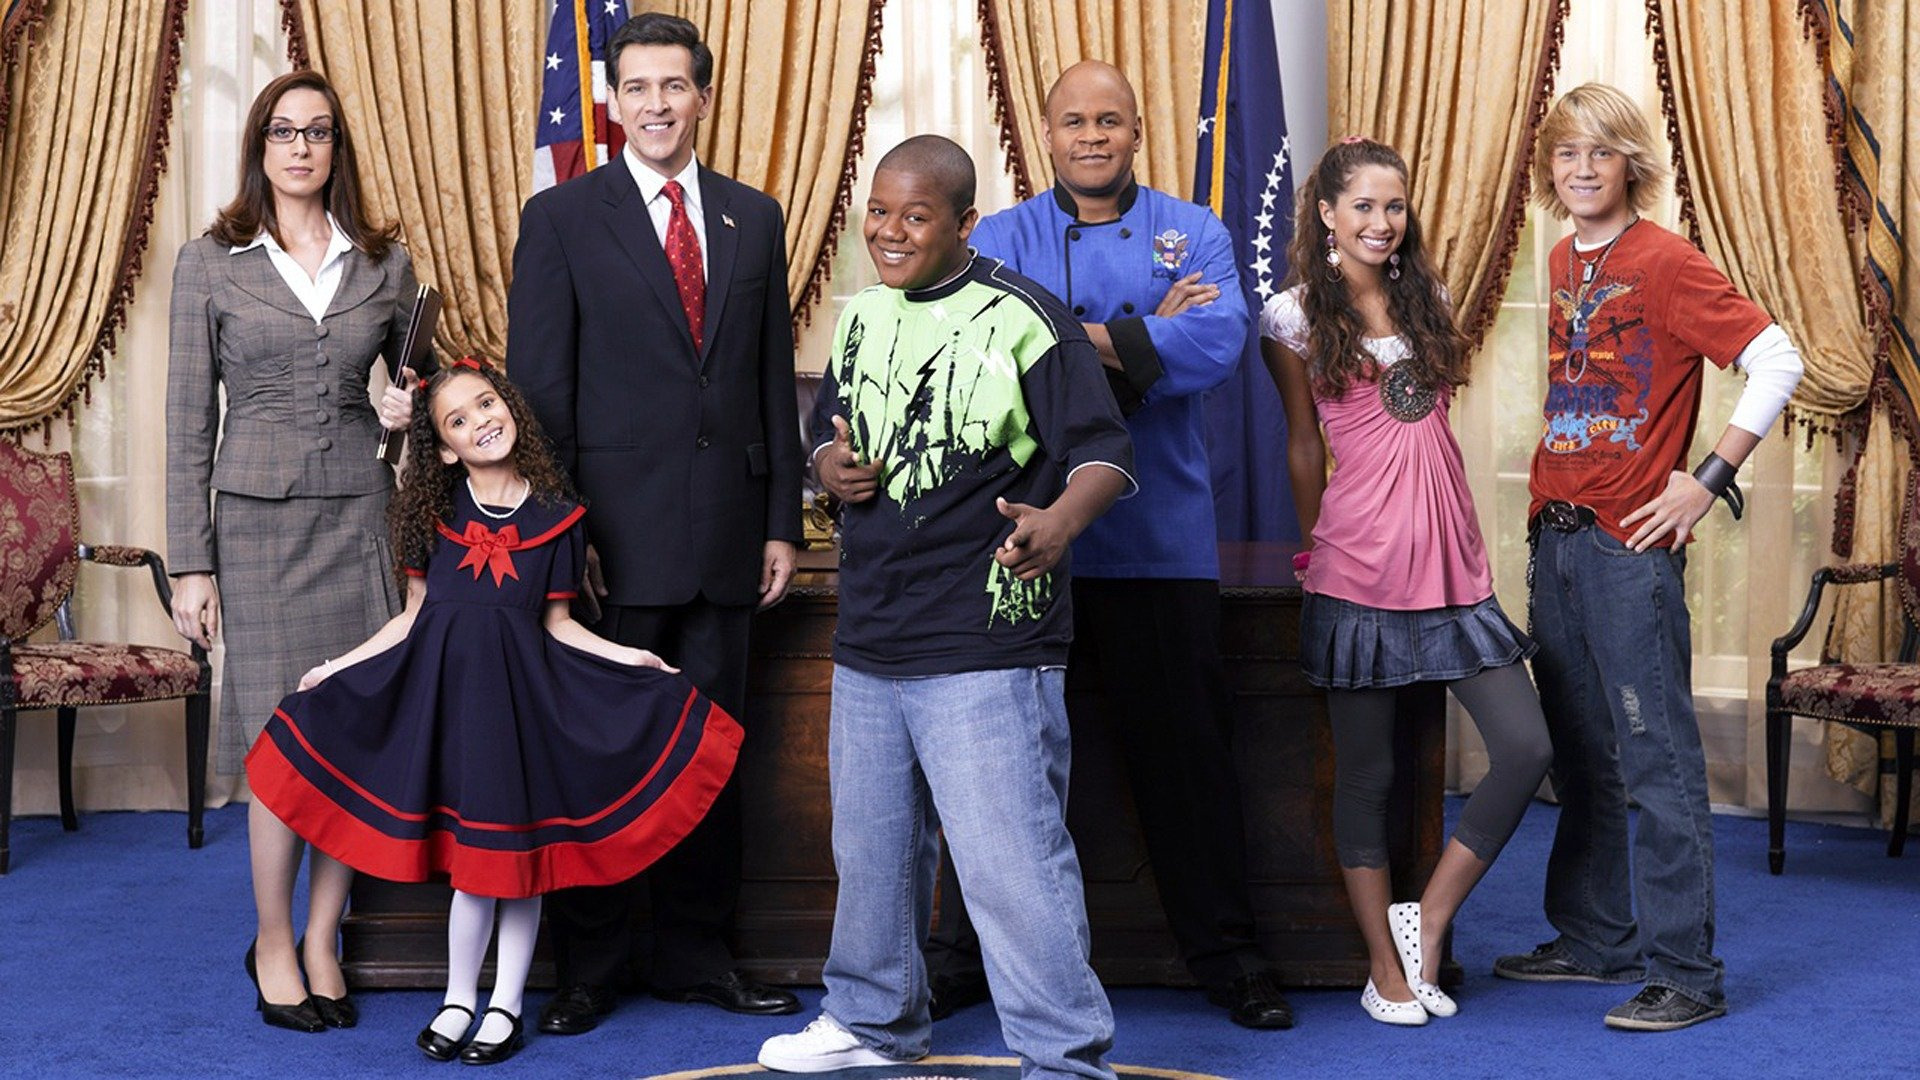 Show Cory in the House